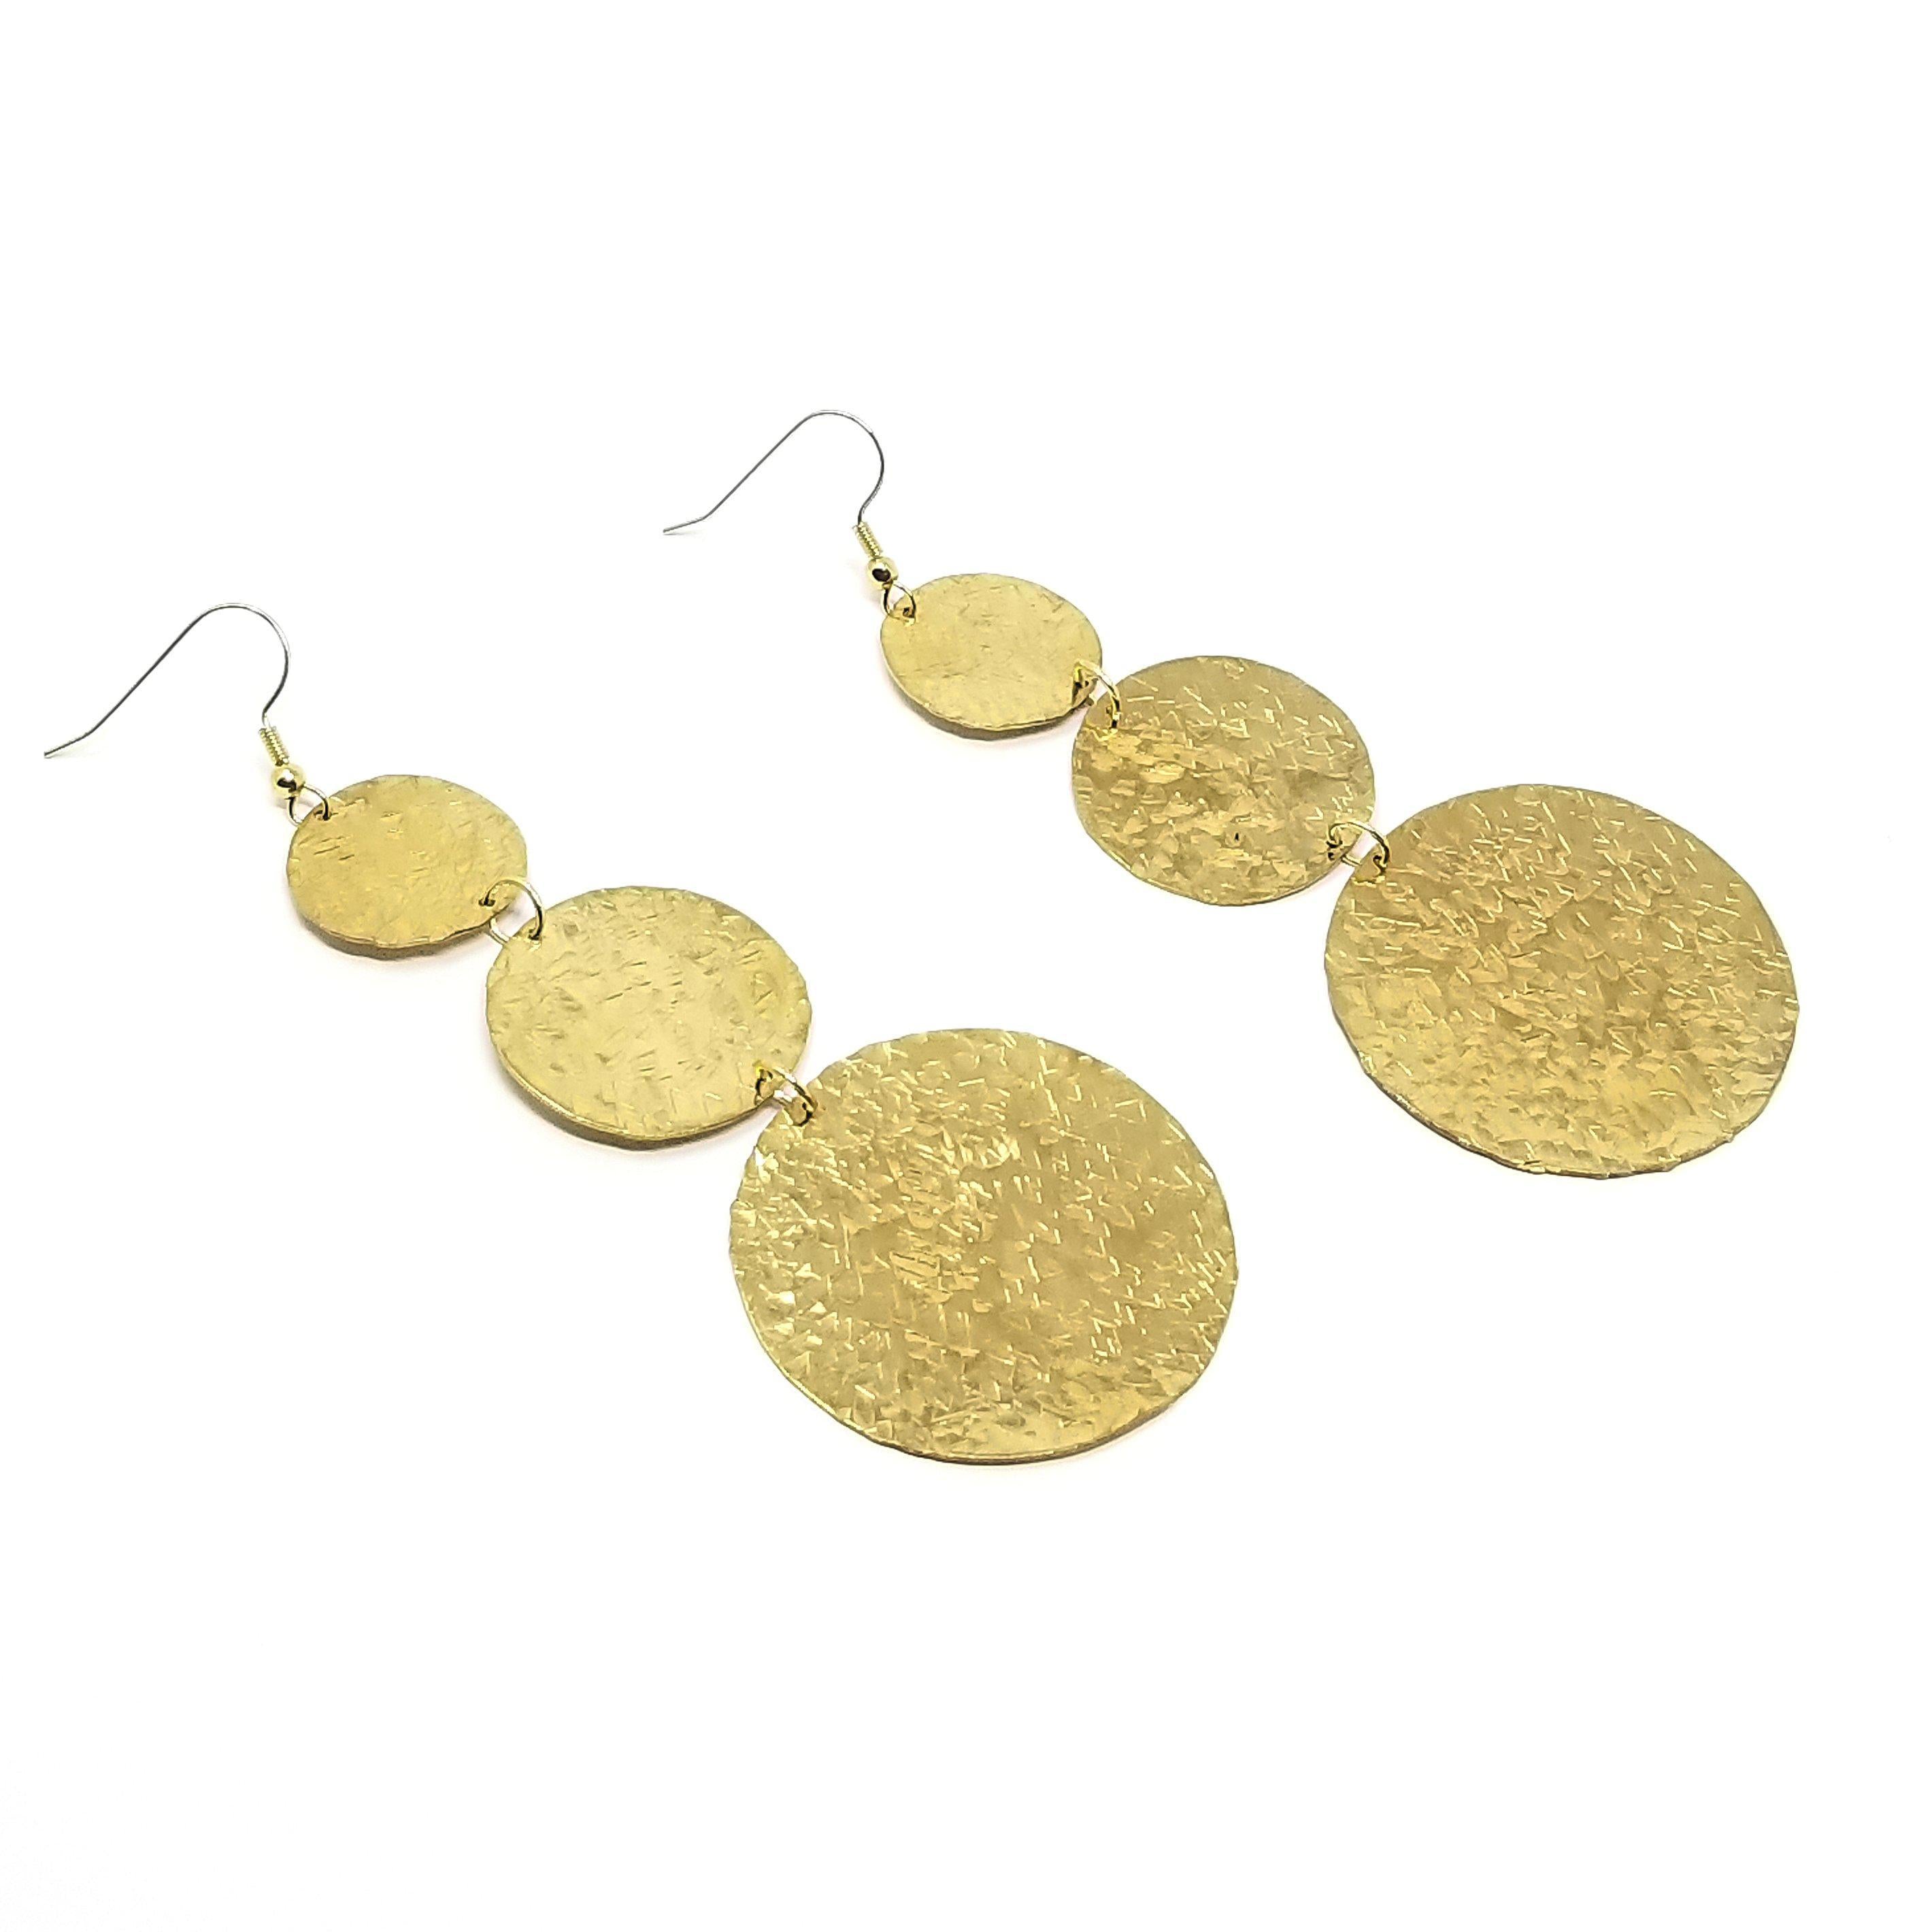 Ascending Moons - Recycled Brass Textured Earrings